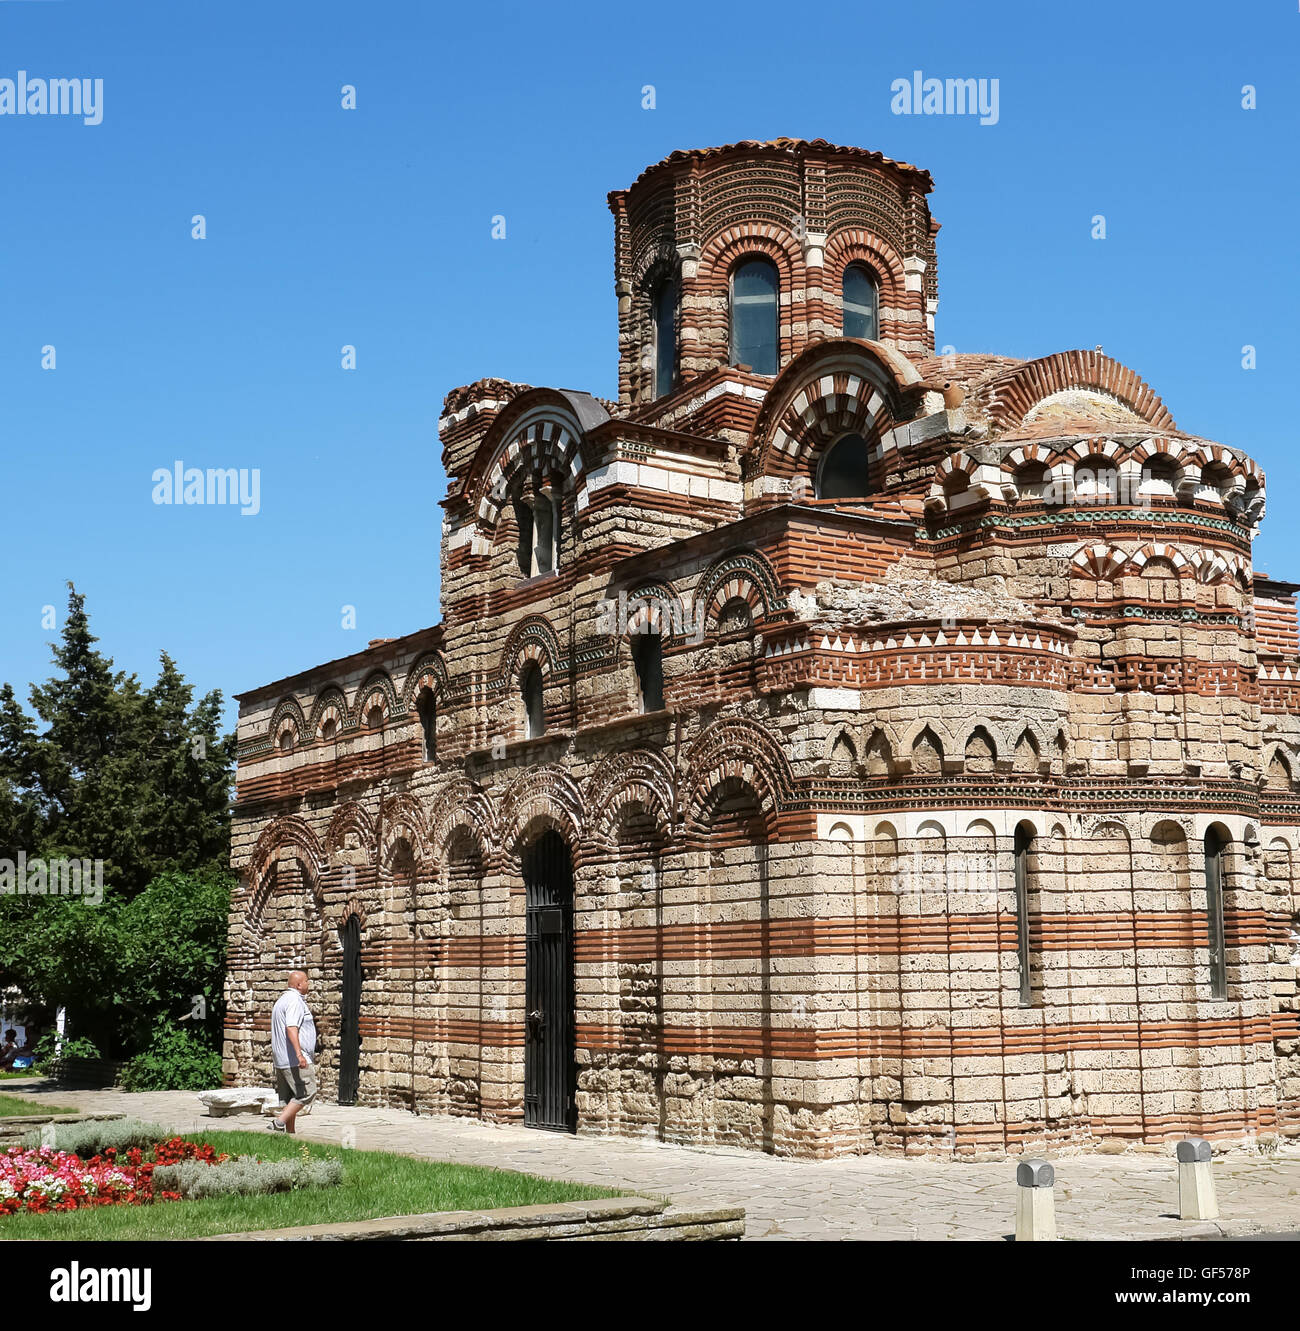 NESSEBAR, BULGARIA - JUNE 15, 2011: Church of Christ Pantocrator on the central square in the old Nessebar town, Bulgaria Stock Photo